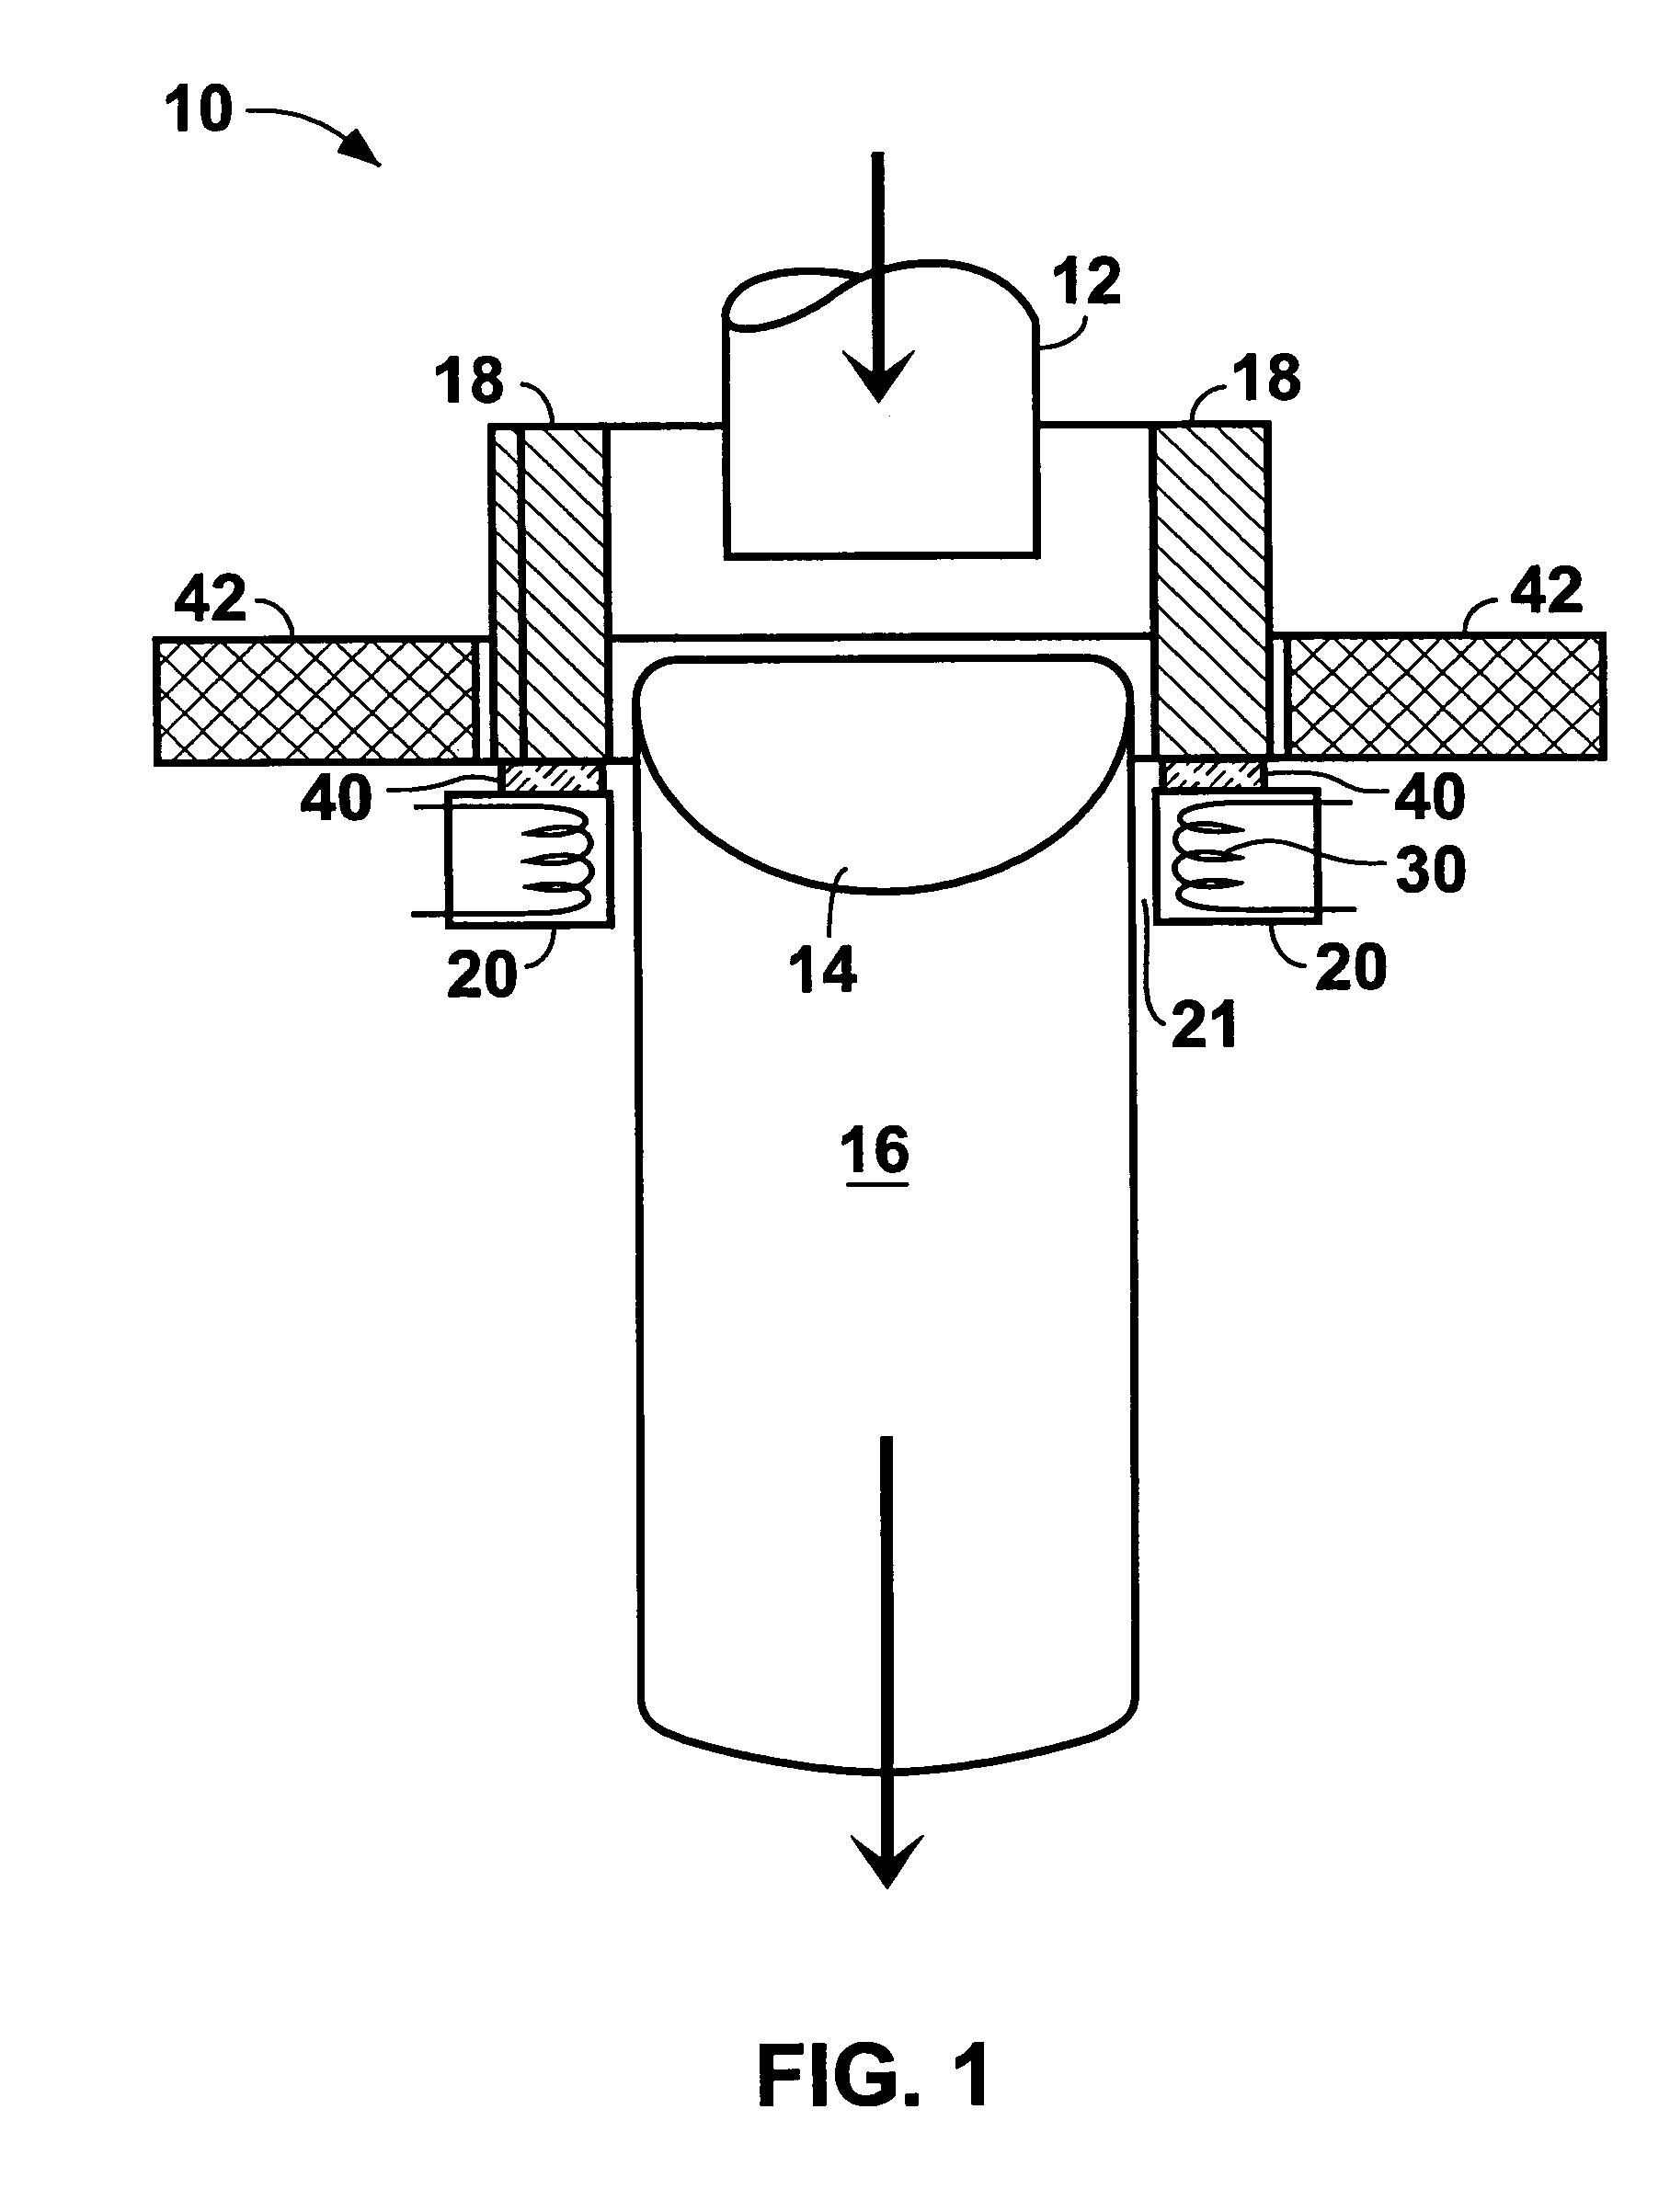 Method and apparatus for treating articles during formation